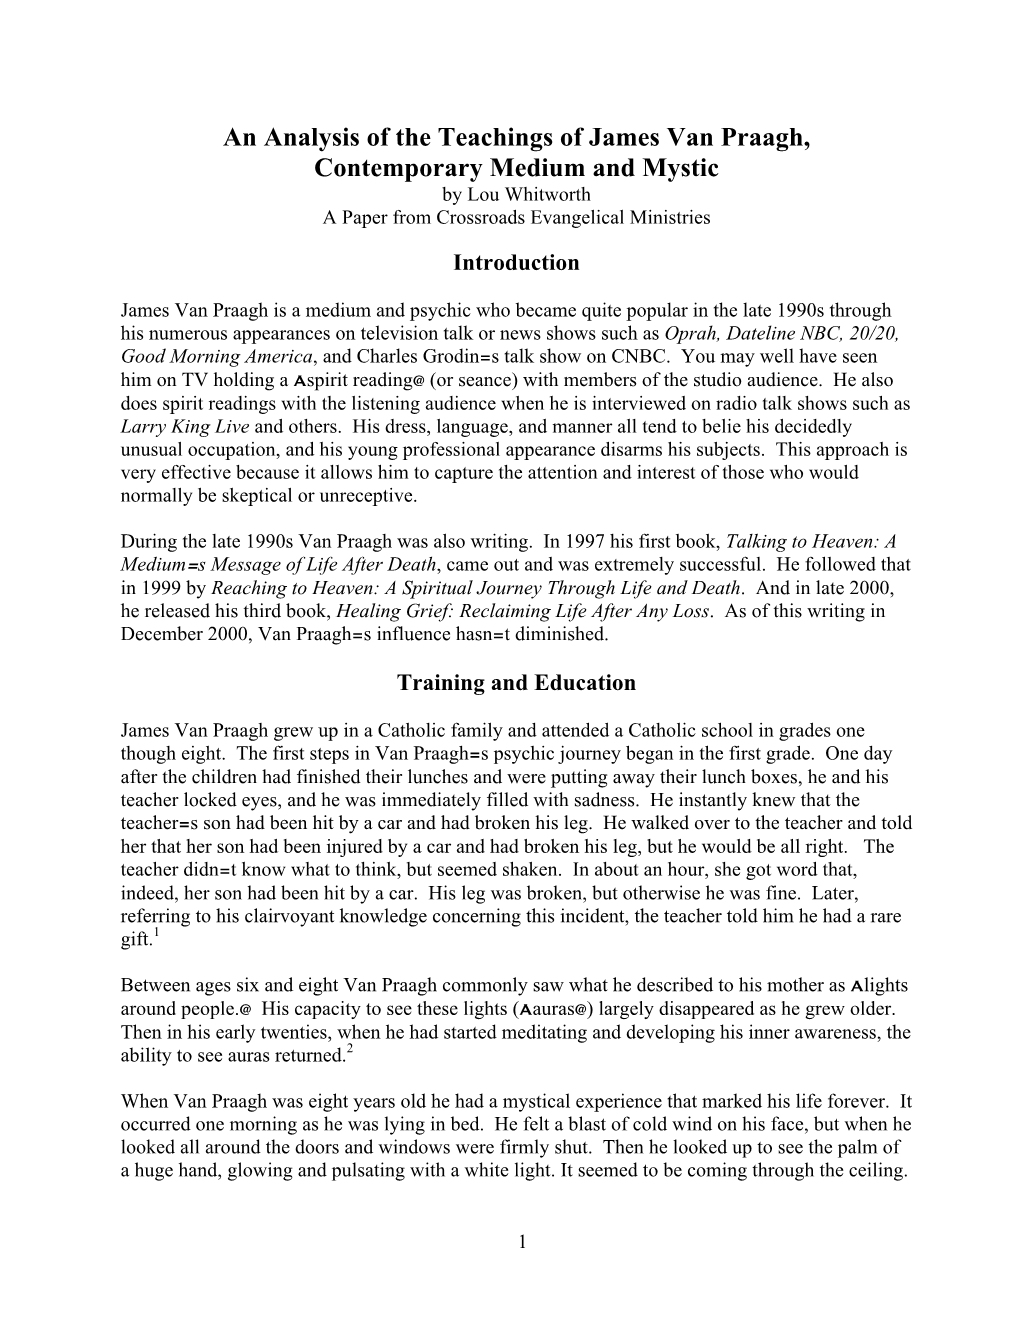 Van Praagh, Contemporary Medium and Mystic by Lou Whitworth a Paper from Crossroads Evangelical Ministries